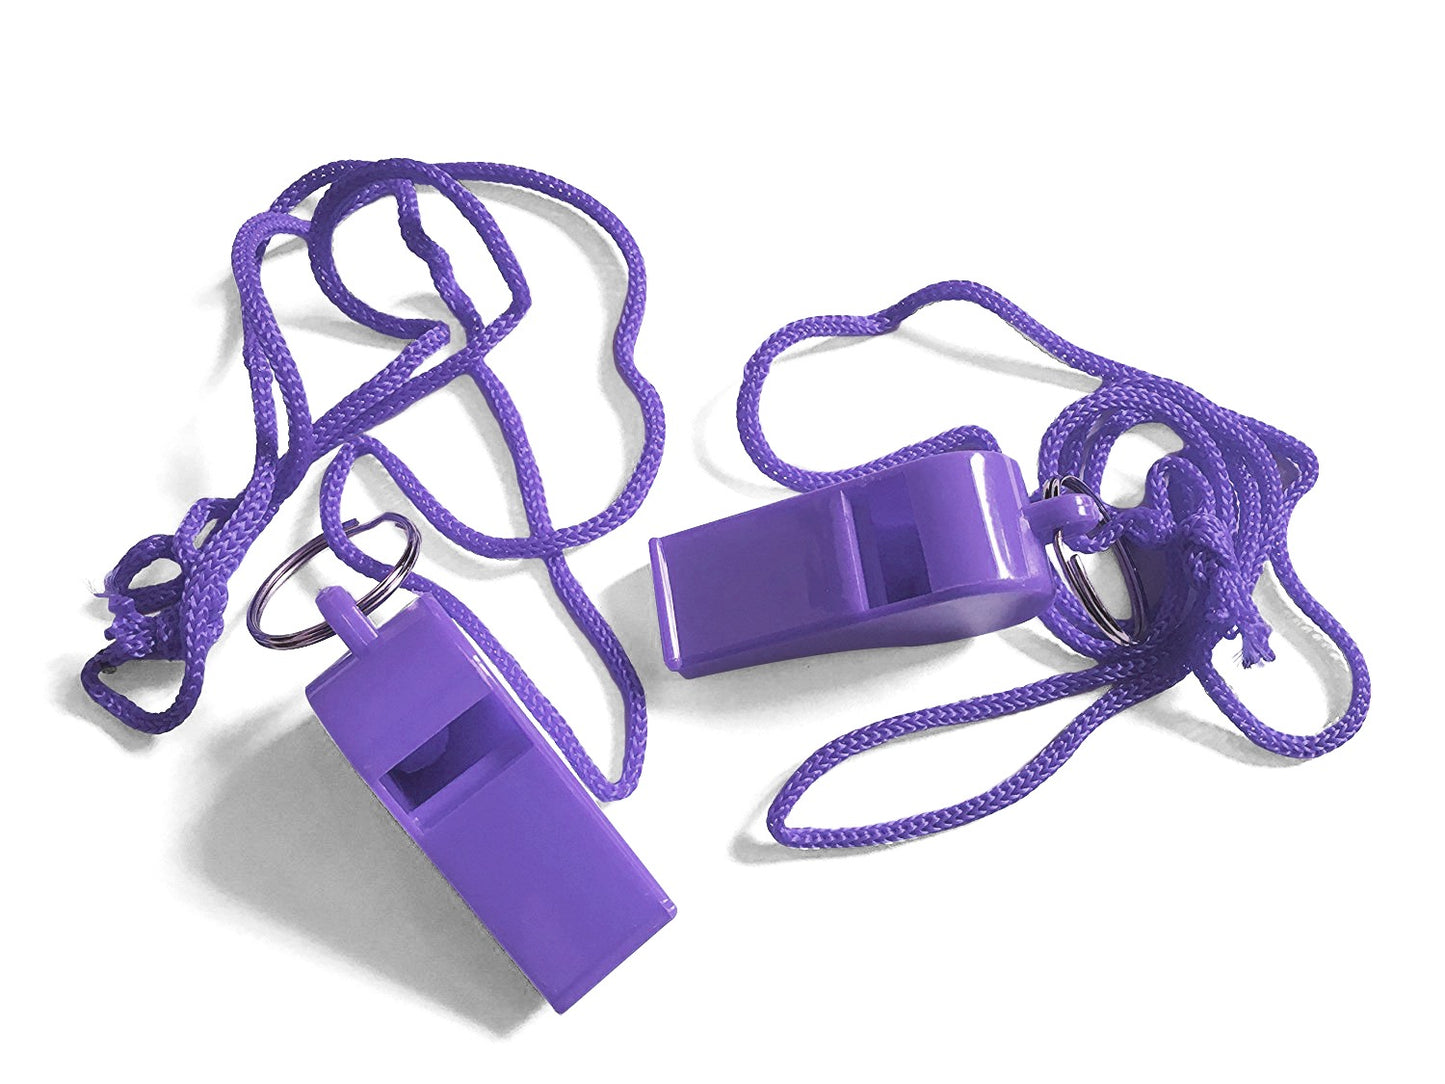 Pack of 15 Purple Plastic Whistles with Lanyard Neck Cord